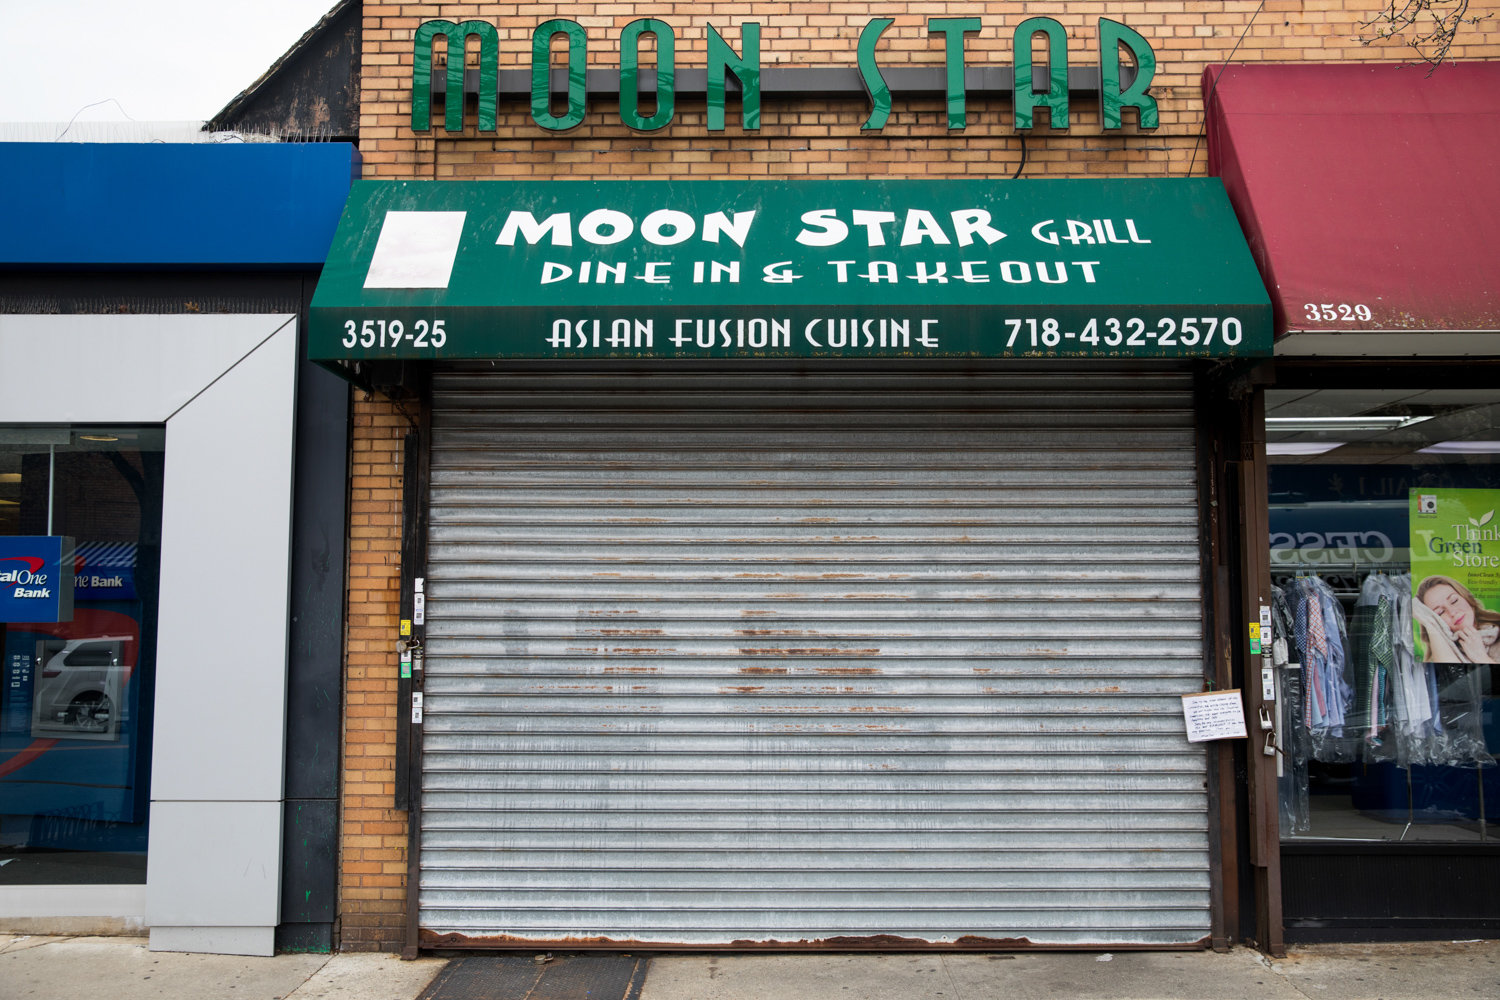 Moon Star is one of several Johnson Avenue eateries that closed as a result of the coronavirus pandemic. Several proposals to help small businesses have been put forward at the state and federal levels, but a concrete plan has yet to be finalized.